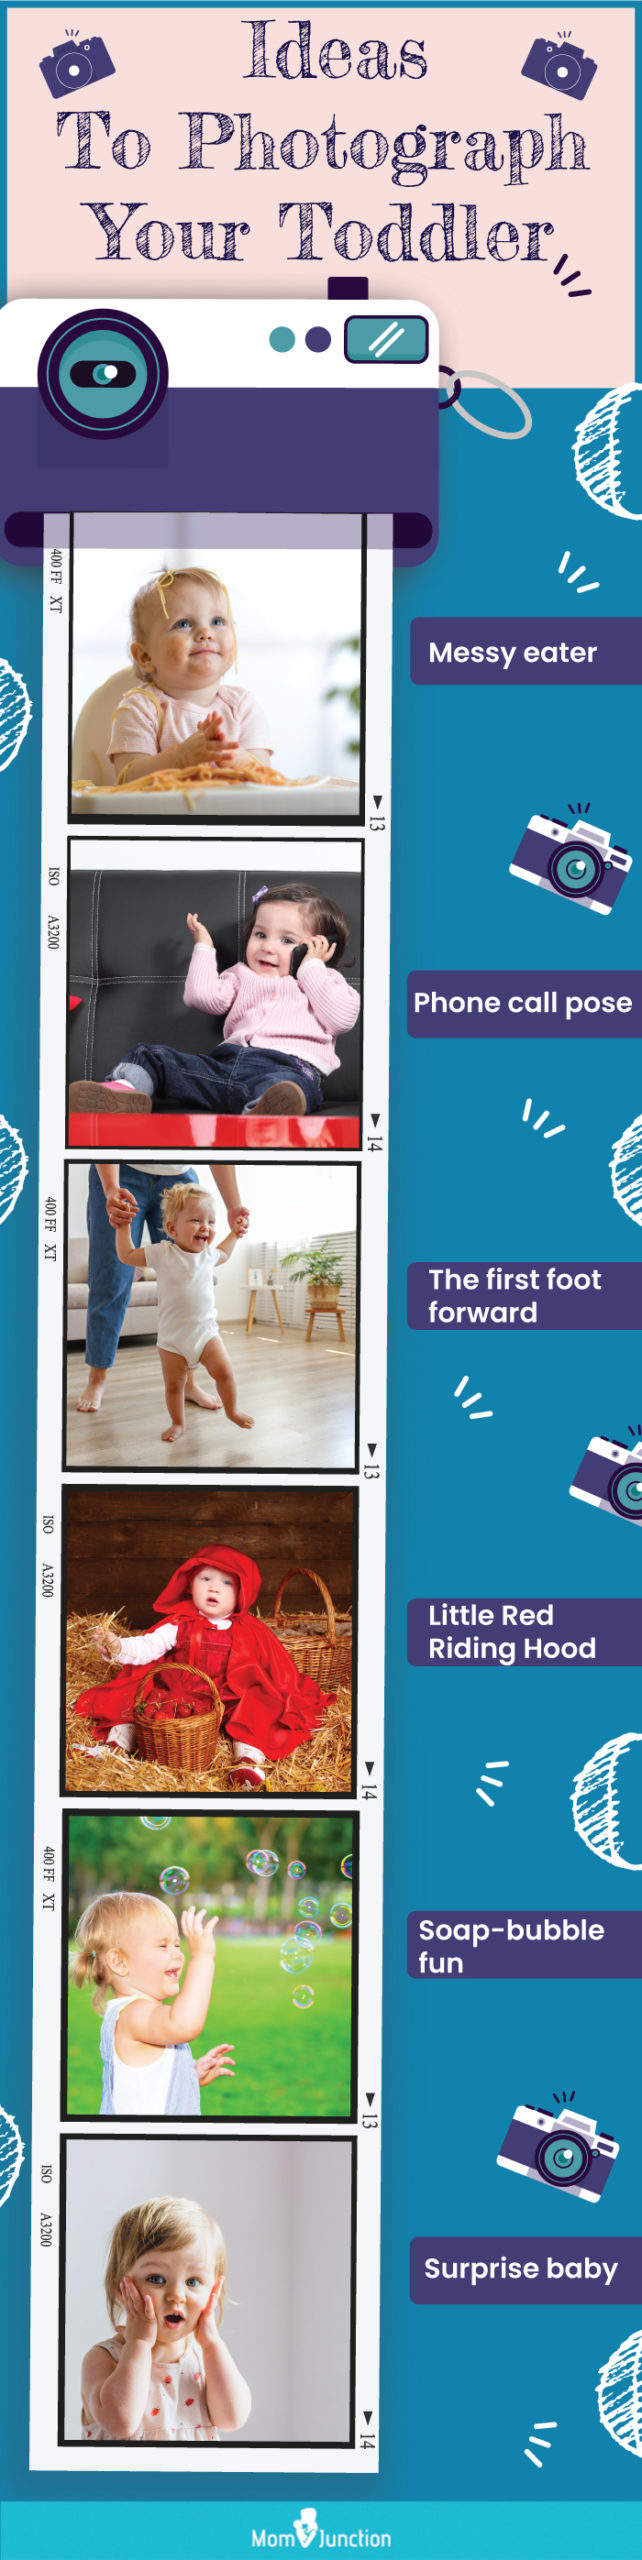 ideas to photograph your toddler (infographic)